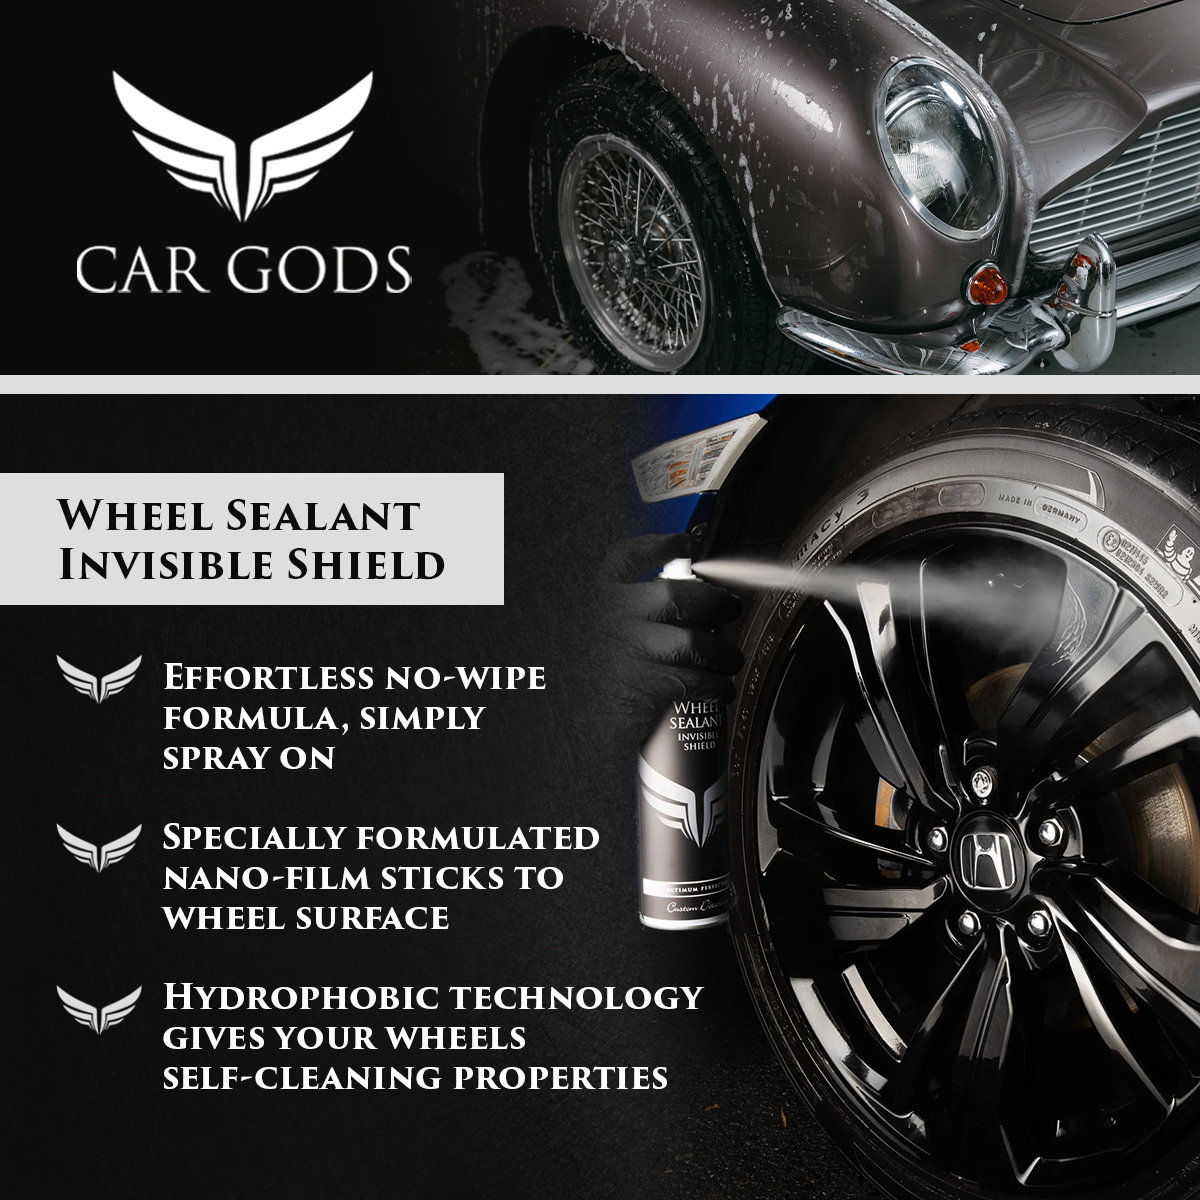 Car Gods Wheel Sealant Invisible Shield. Specially formulated no-wipe hydrophobic wheel coating will give your wheels self-cleaning properties, keeping them cleaner for longer thanks to the spray-on nano-film technology.